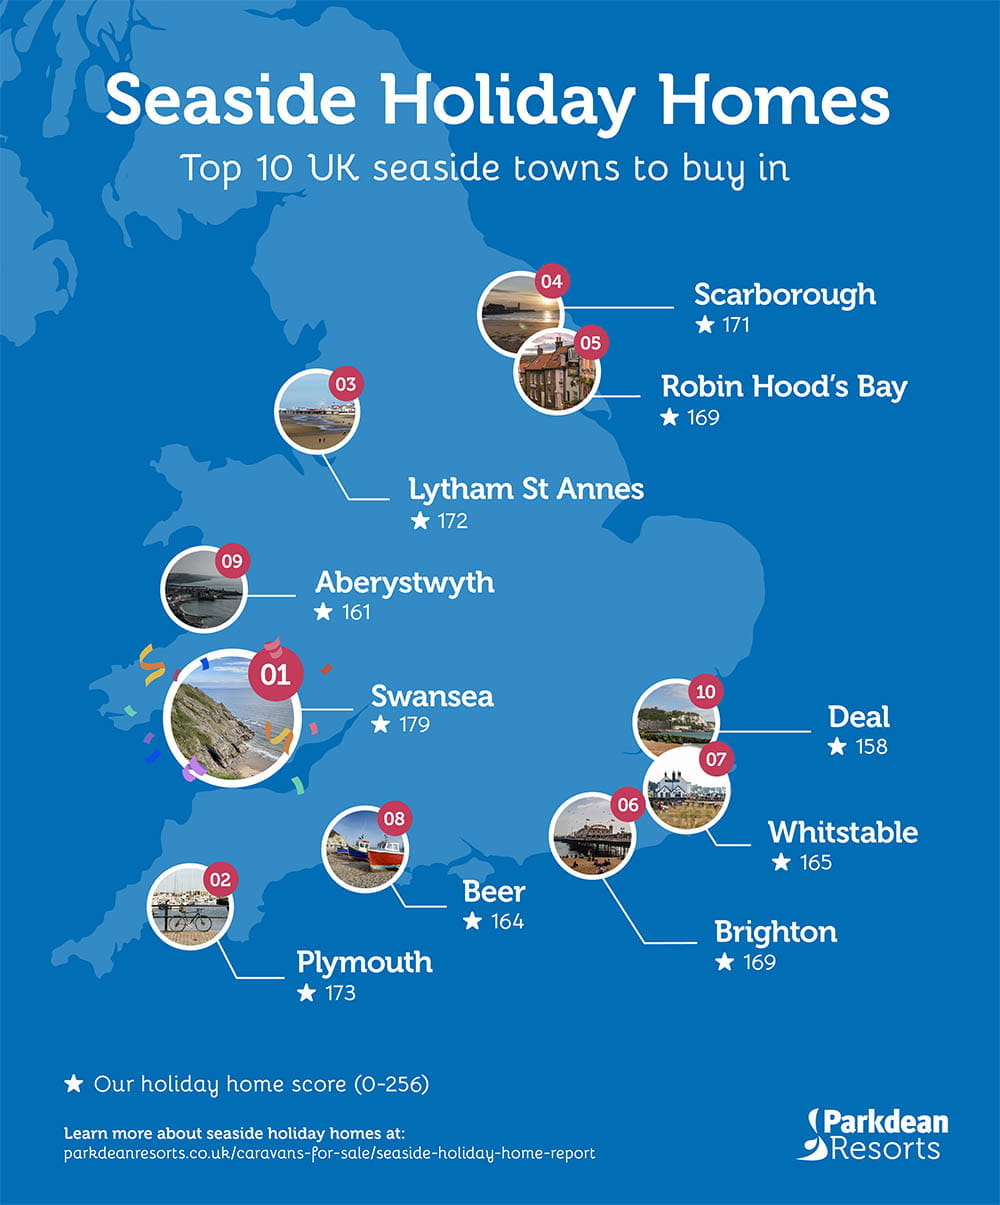 An infographic map showing the top 10 seaside towns in the UK to buy a holiday home